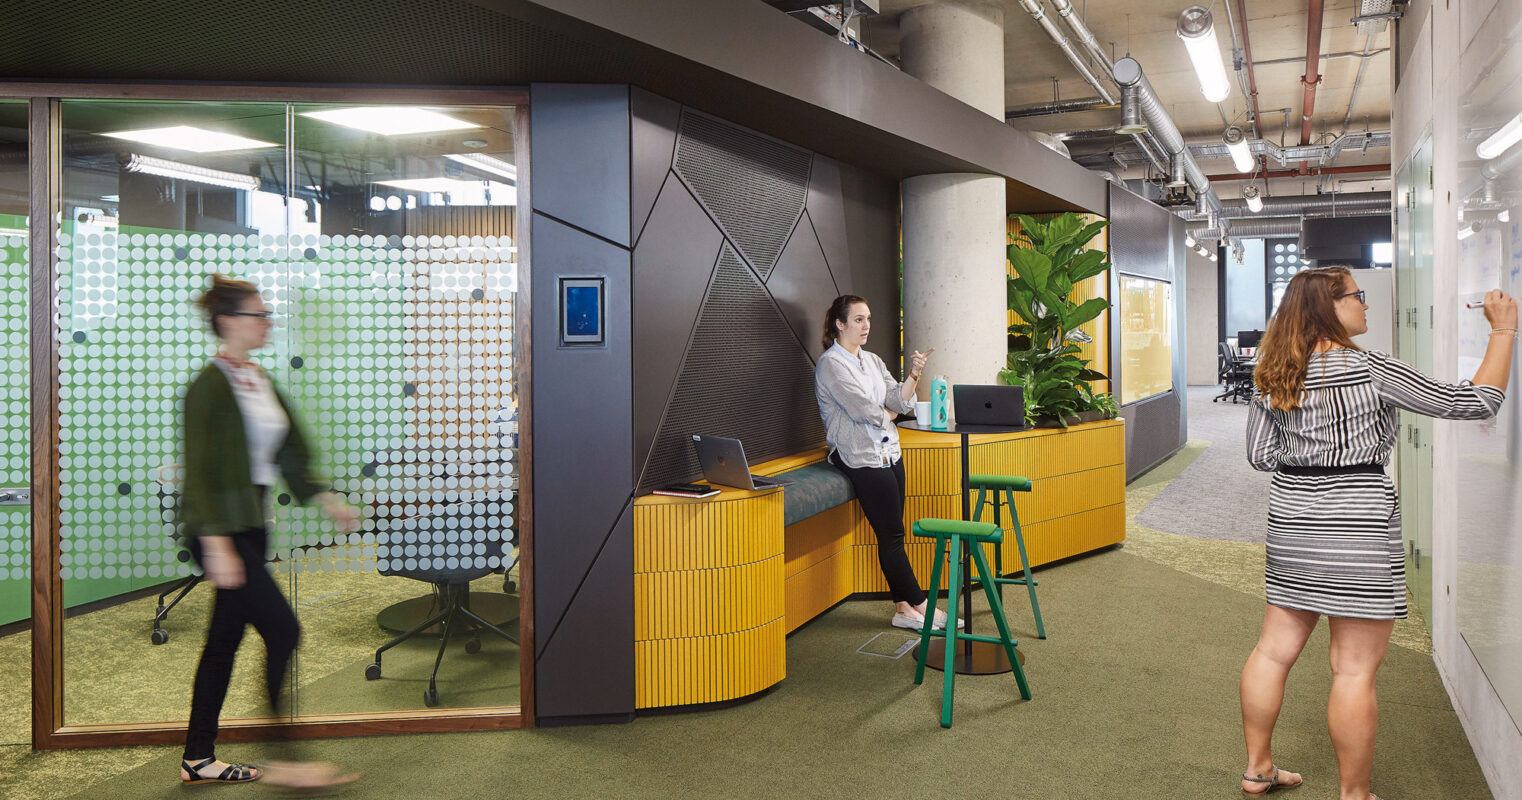 Modern office lobby showcasing geometric gray wall paneling, a reception desk with dynamic yellow accents, and high green stools. Dot-patterned glass partitions enhance privacy, while an employee interacts with a wall-mounted interface opposite to a glass whiteboard in use.